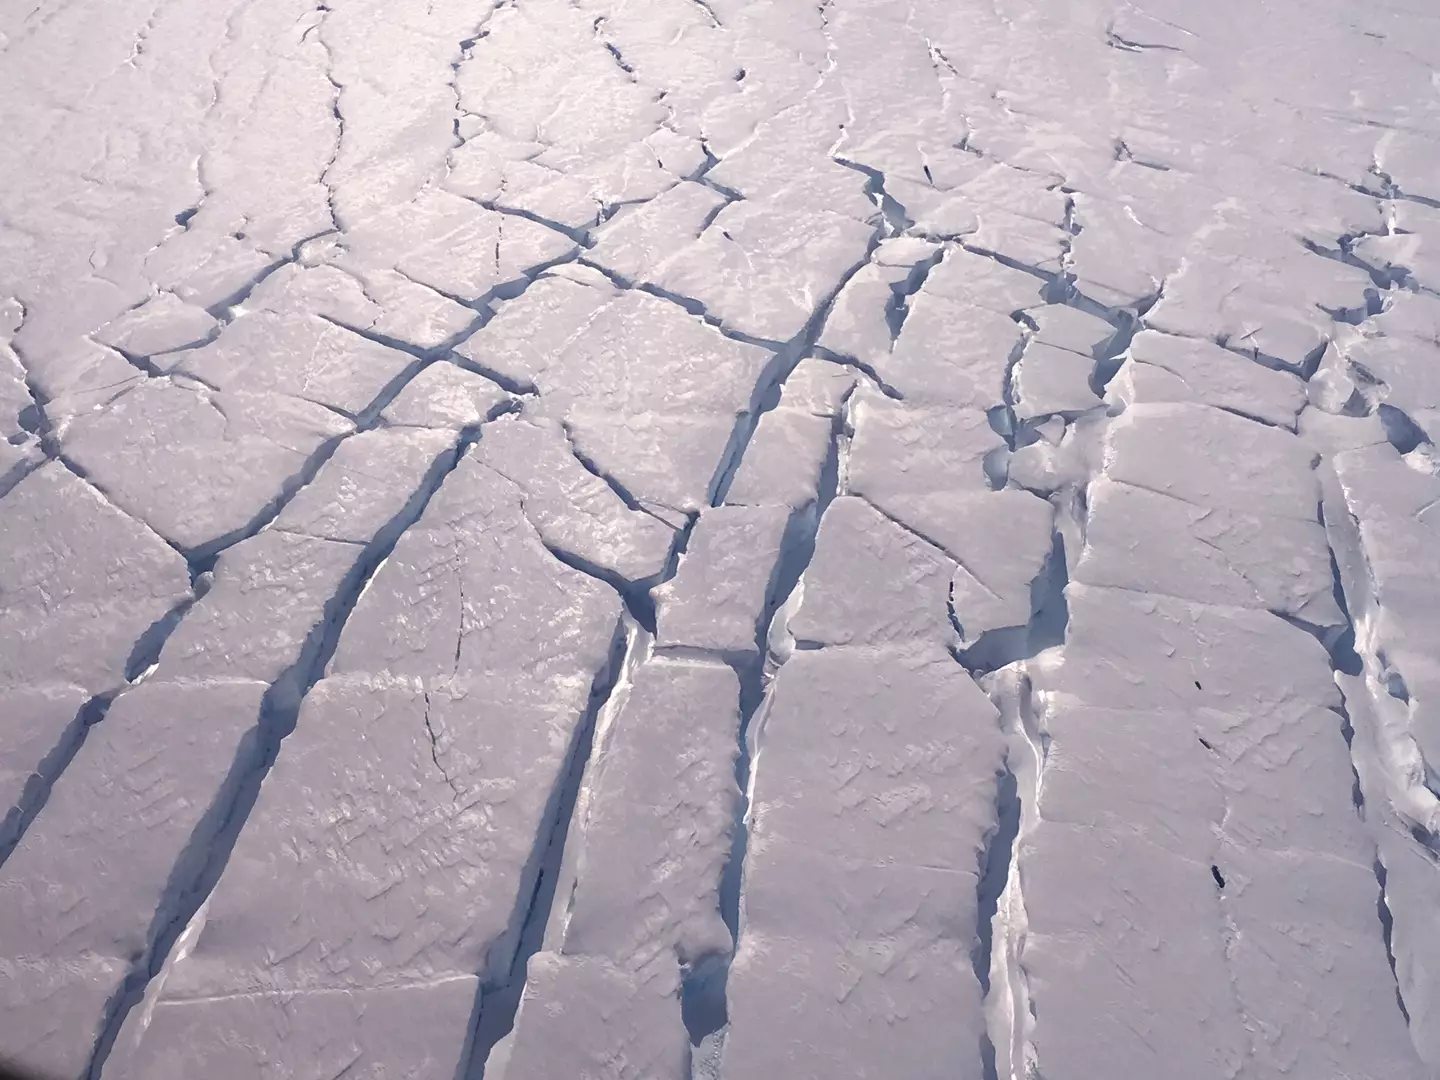 The 'Doomsday Glacier' is 'in trouble', experts warn.